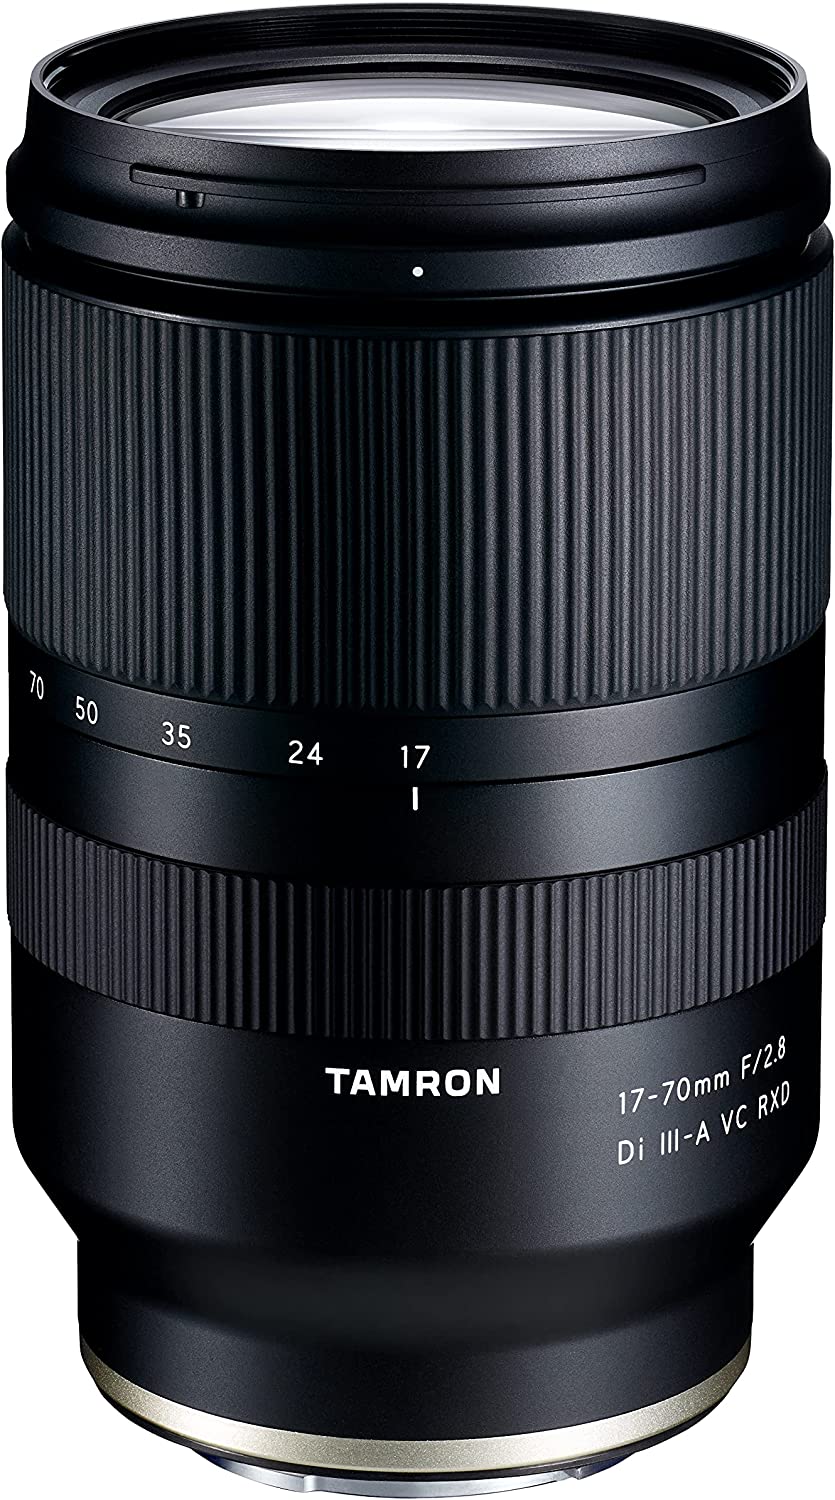 Detec™ Tamron 17-70mm f/2.8 Di III-A VC RXD Lens for Sony E APS-C Mirrorless Cameras